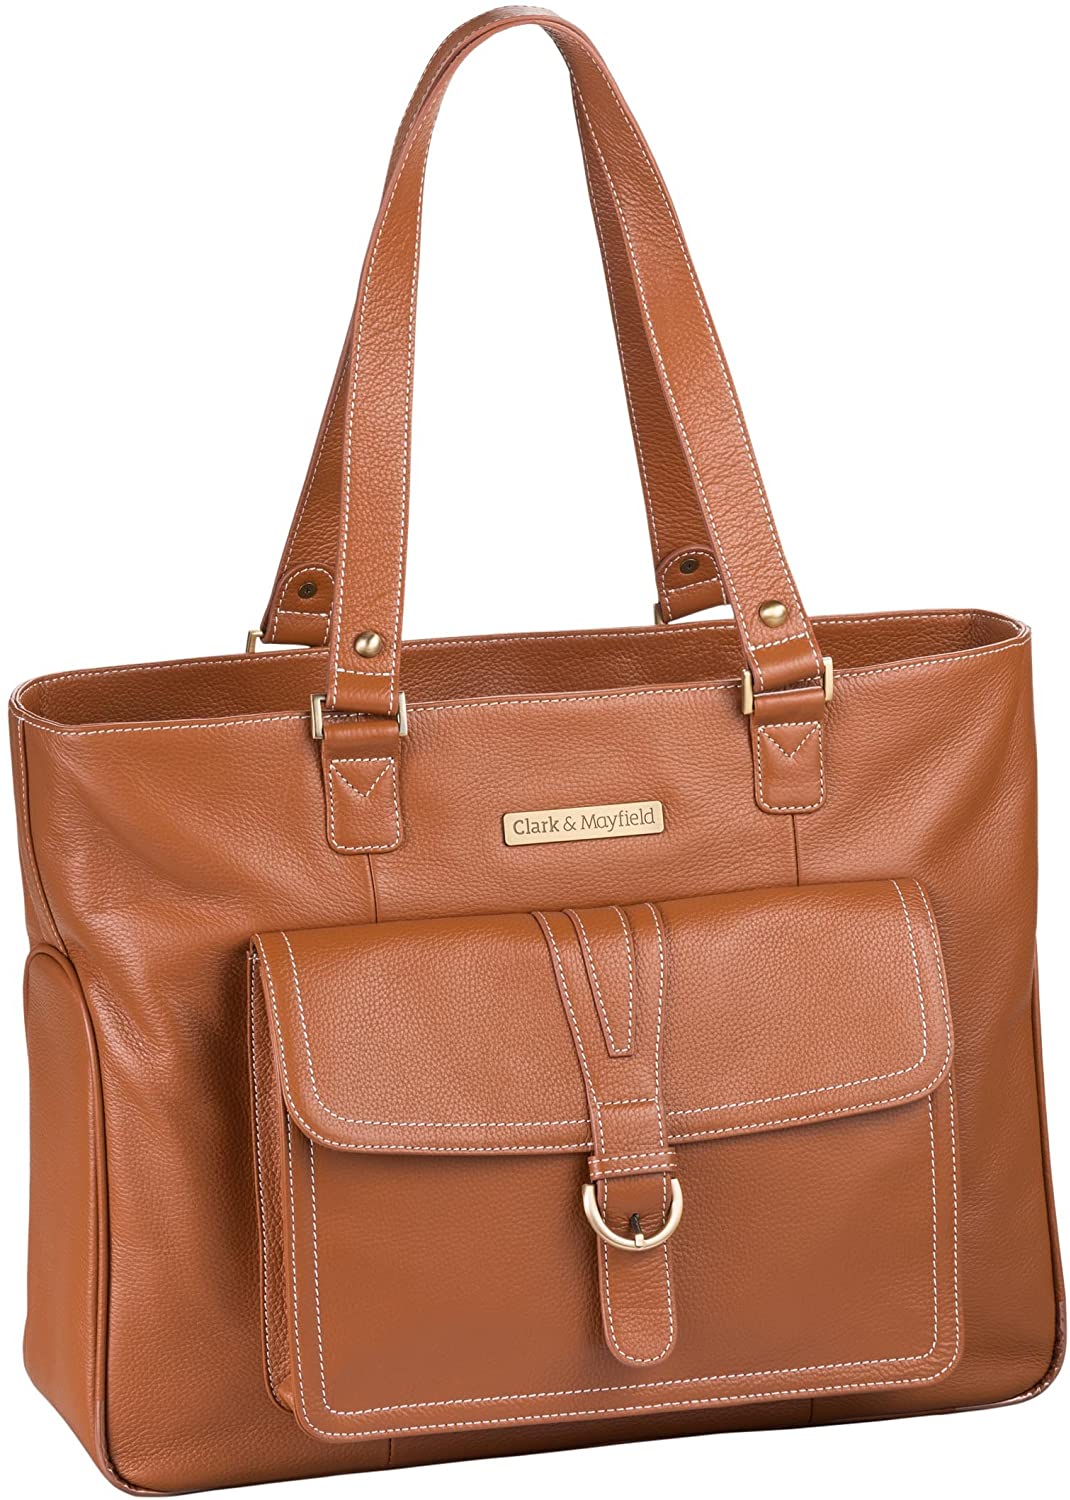 B076ZXZM15 Clark & Mayfield Stafford Pro Leather Laptop Tote 17.3" (Camel)